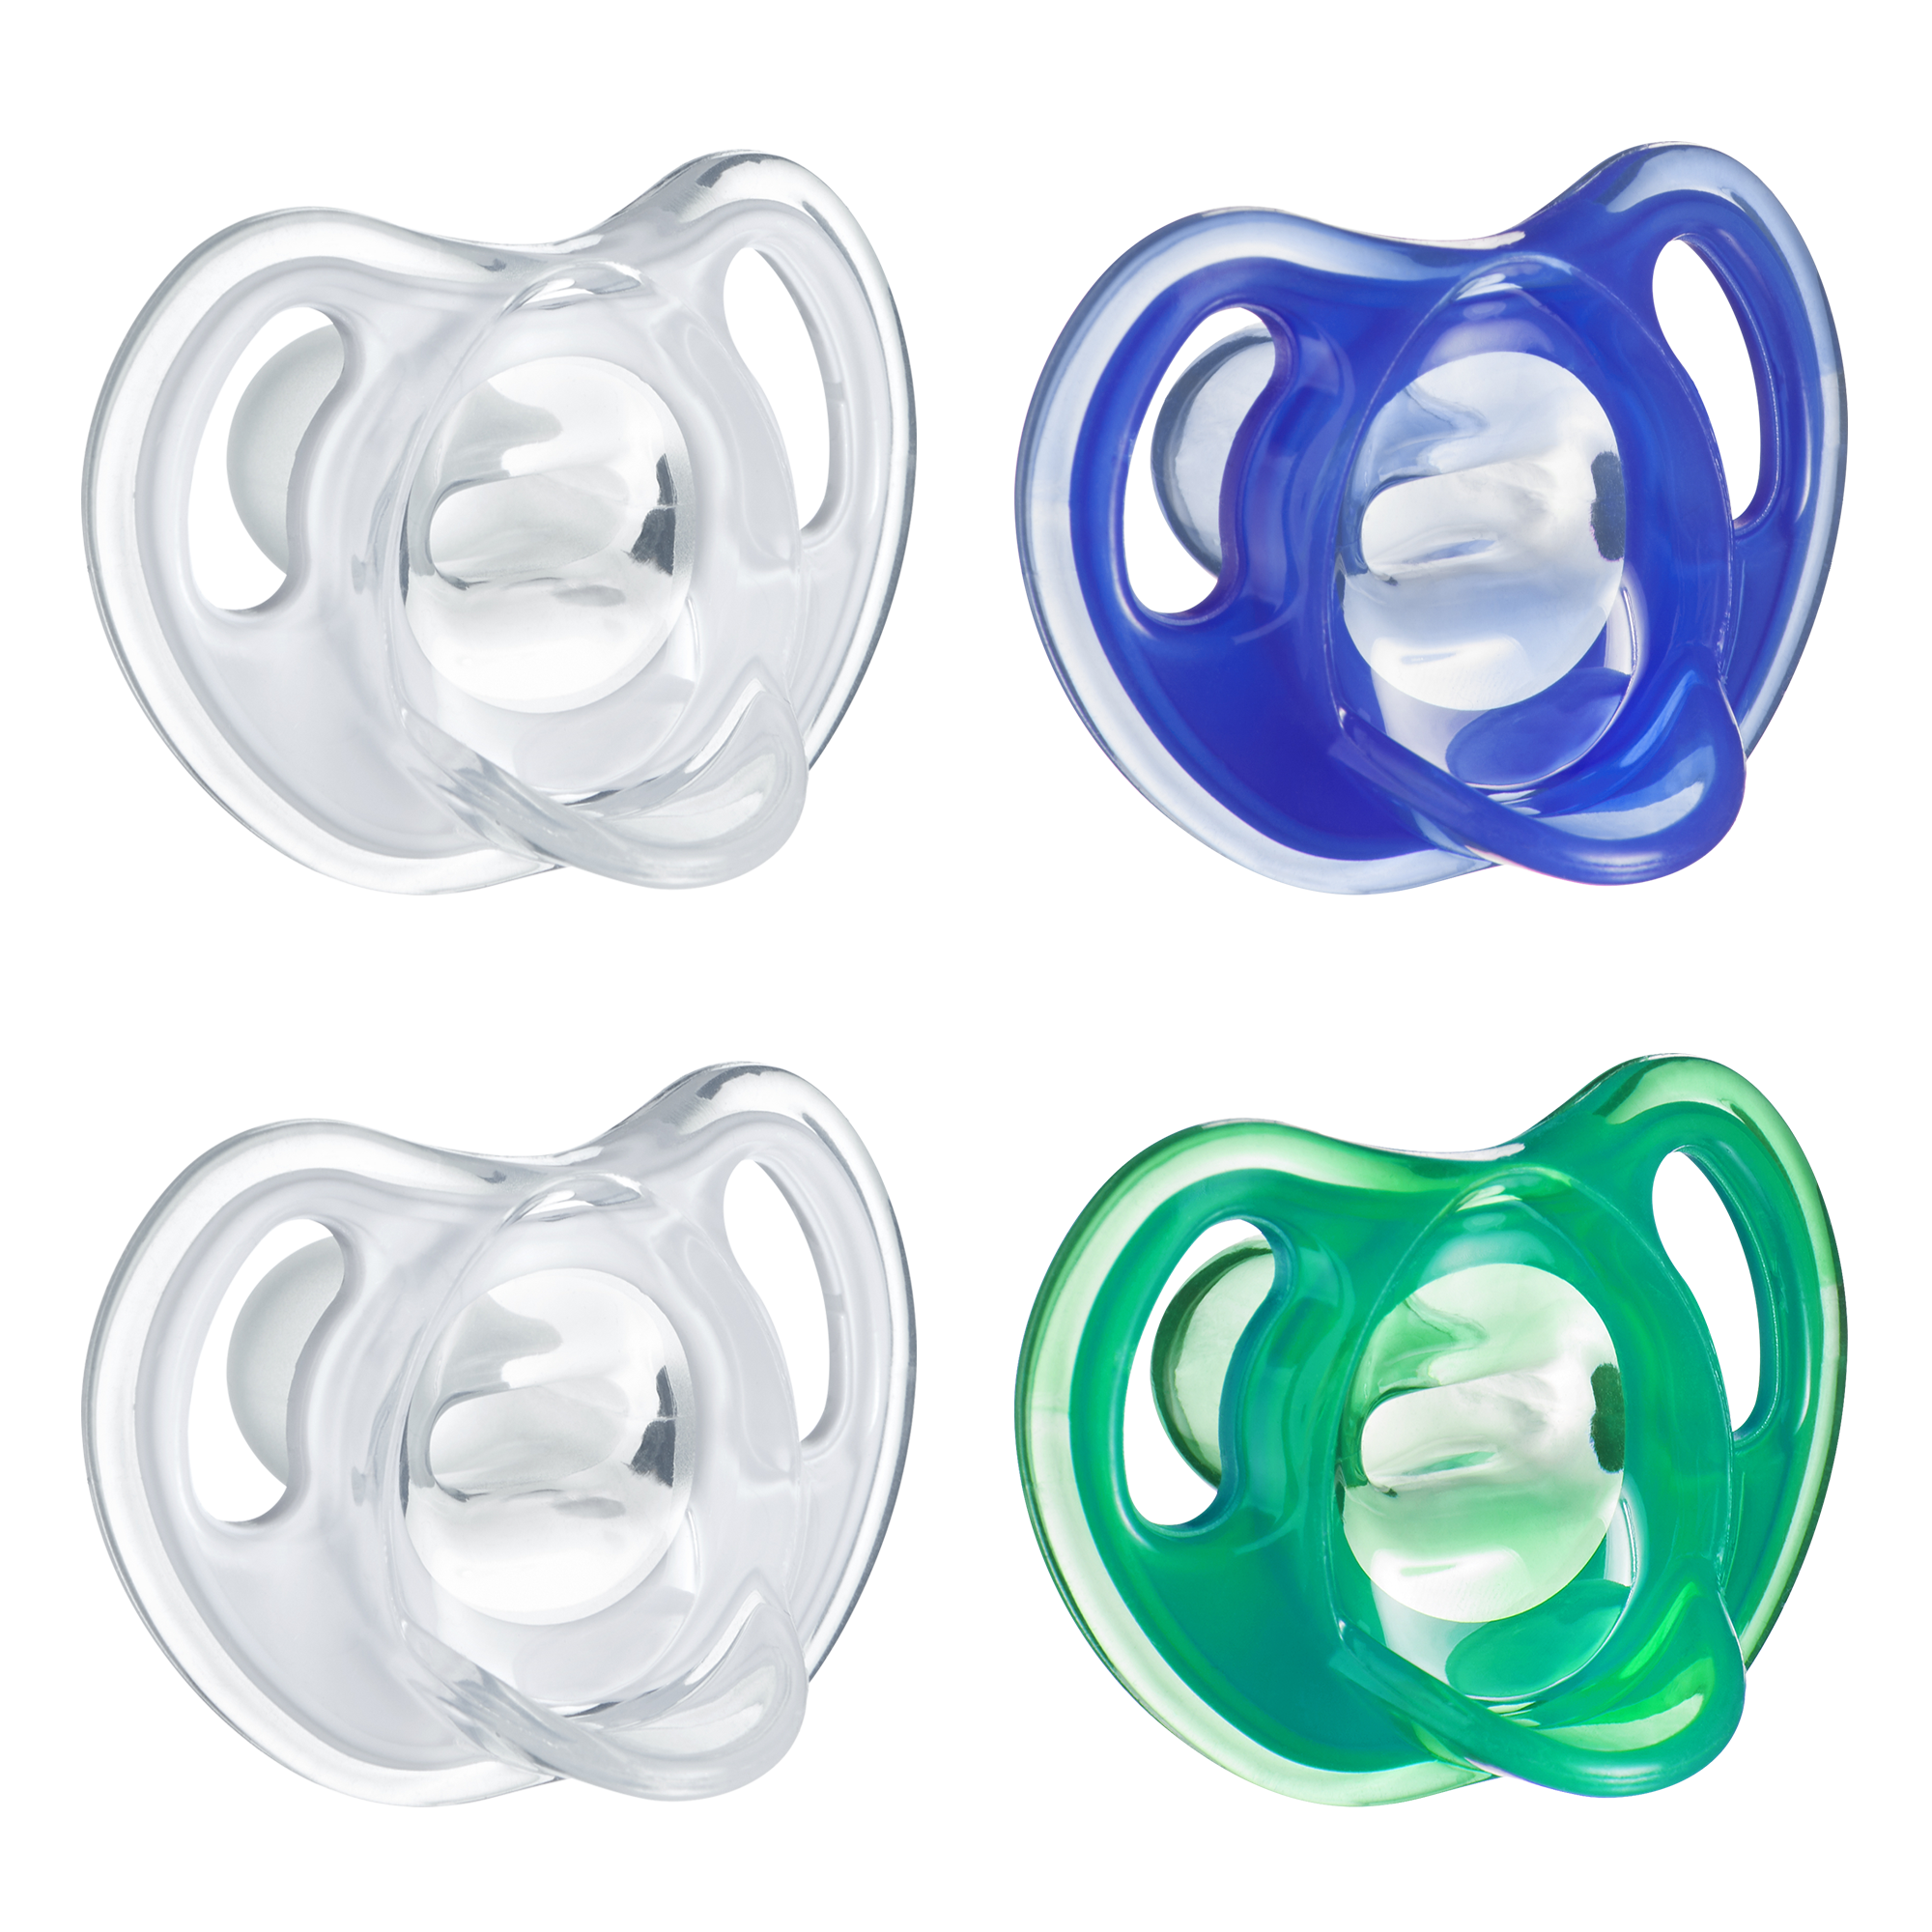 Tommee Tippee Ultra-Light Silicone Pacifier, Symmetrical One-Piece Design, BPA-Free Silicone Binkies, 18-36m, 4-Count - image 1 of 8